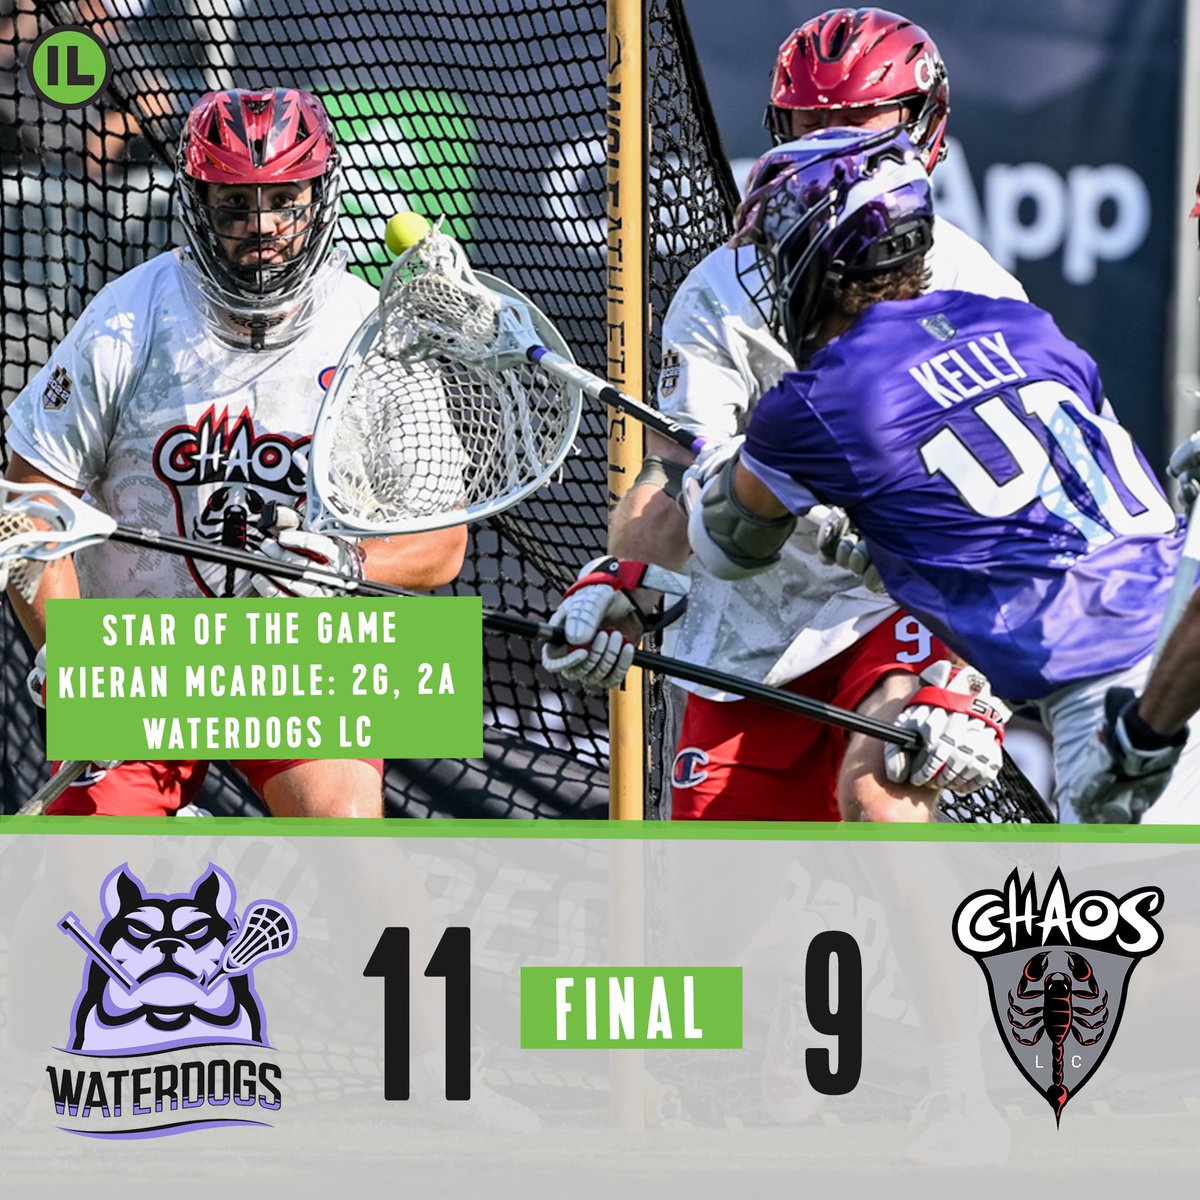 The @PLLWaterdogs become the third @PremierLacrosse champion! insidelacrosse.com/article/waterd…